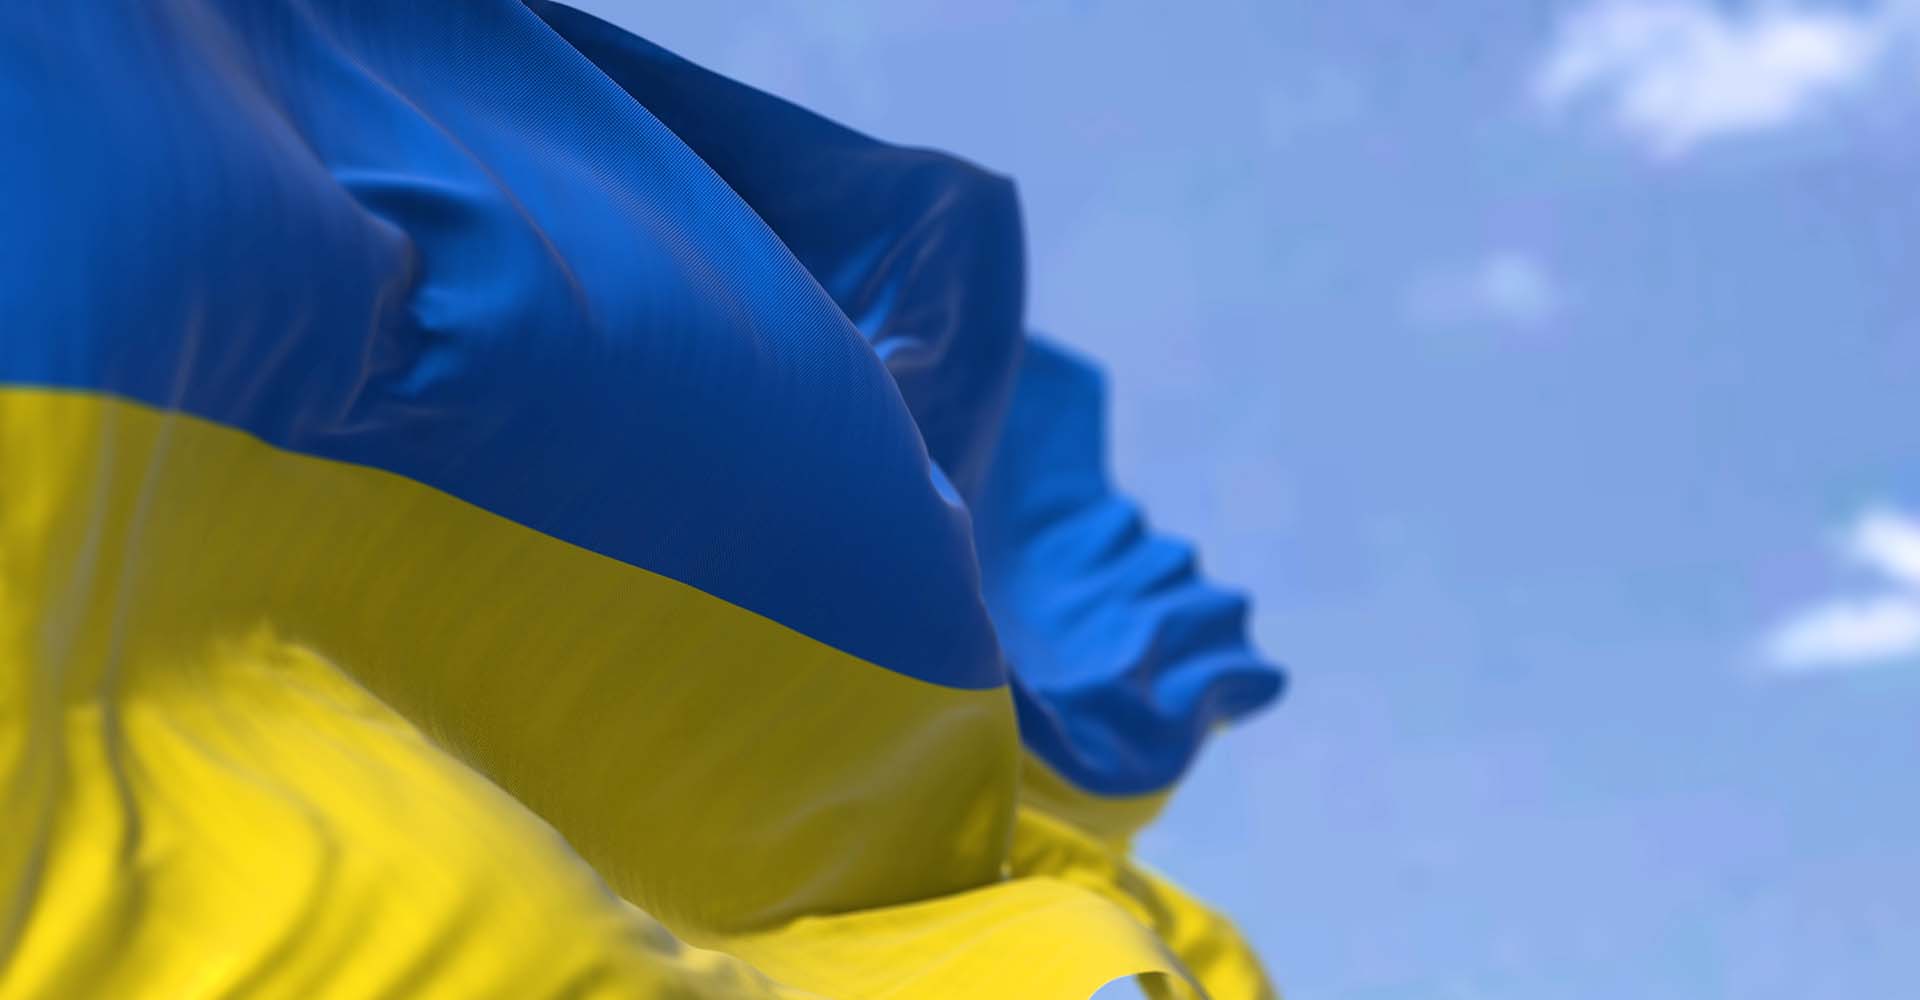 Detail of the national flag of Ukraine waving in the wind. 